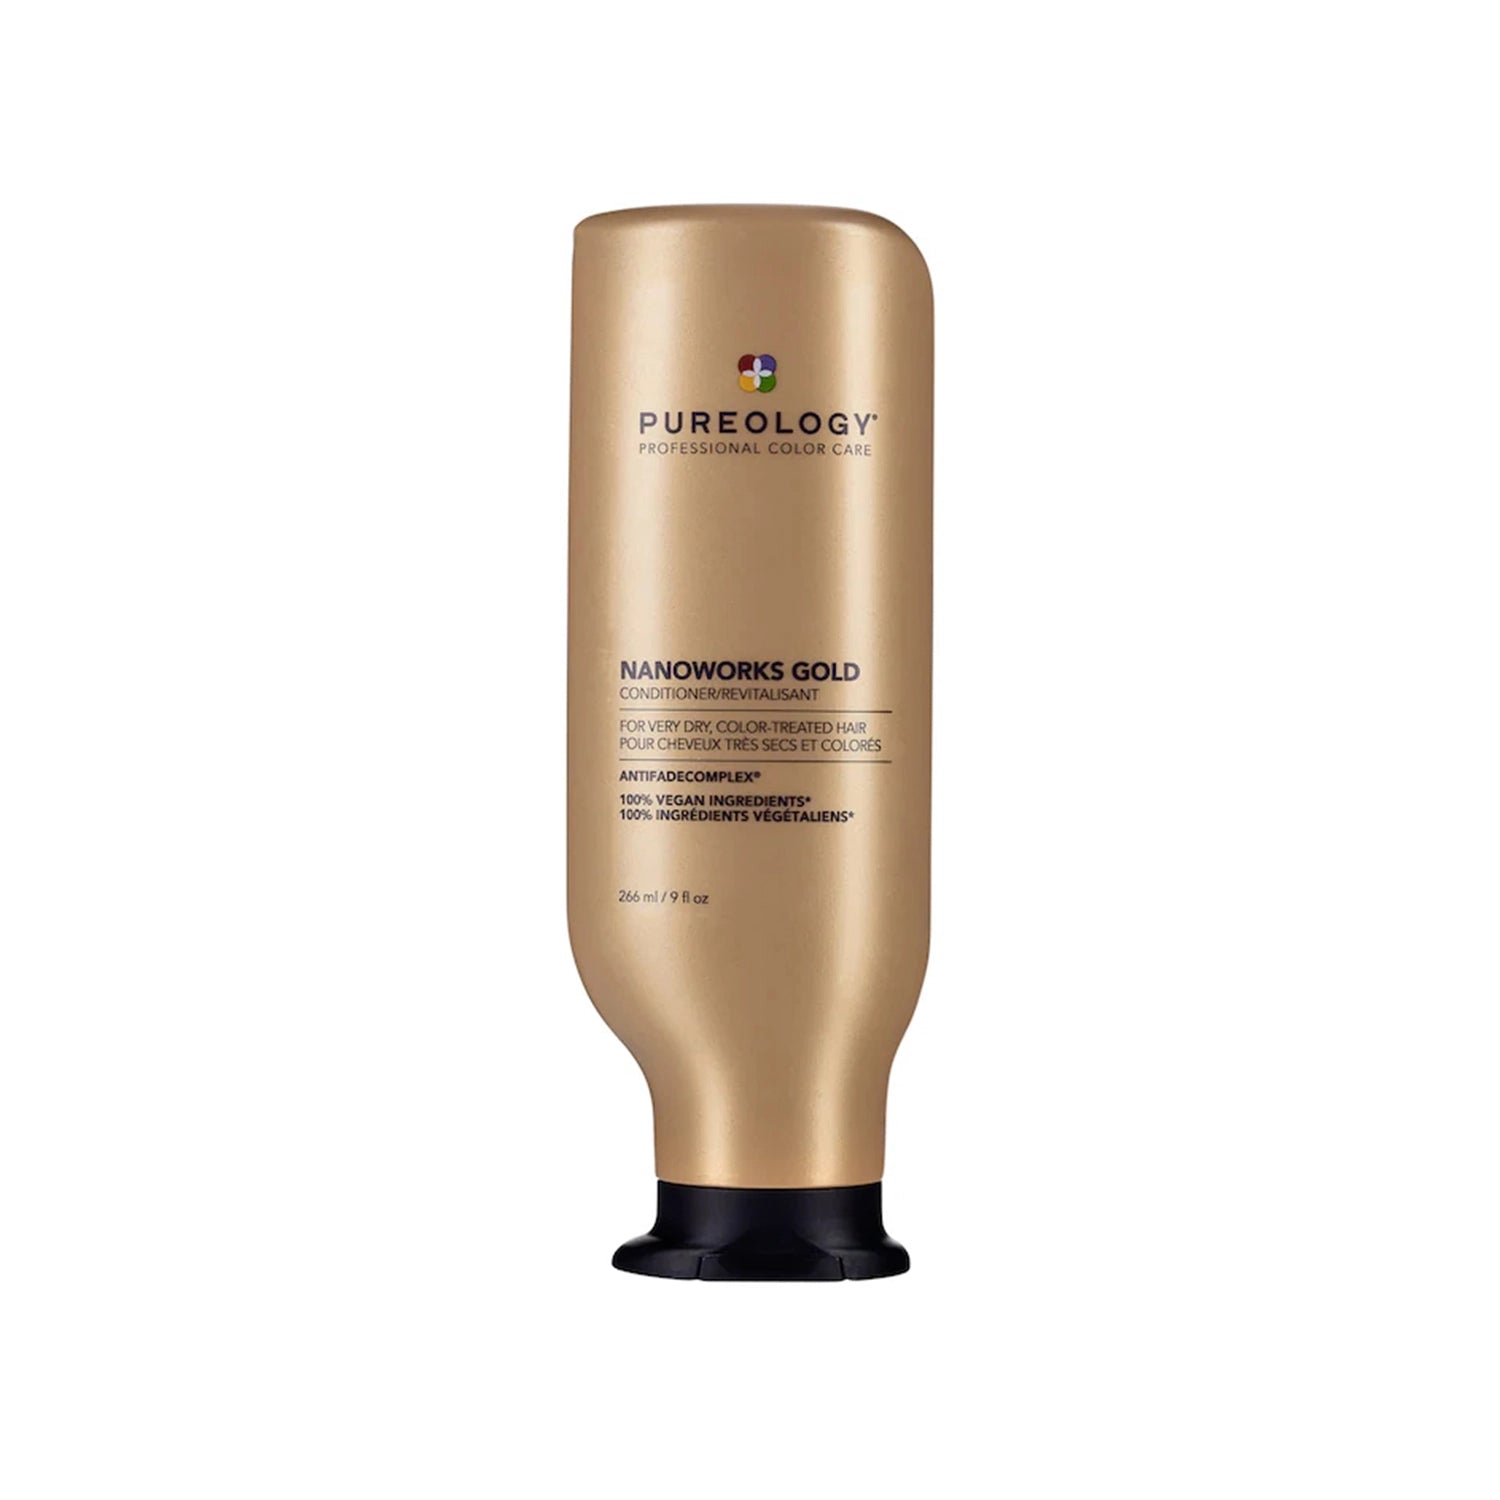 Pureology -Nanoworks Gold Conditioner, 266 ml